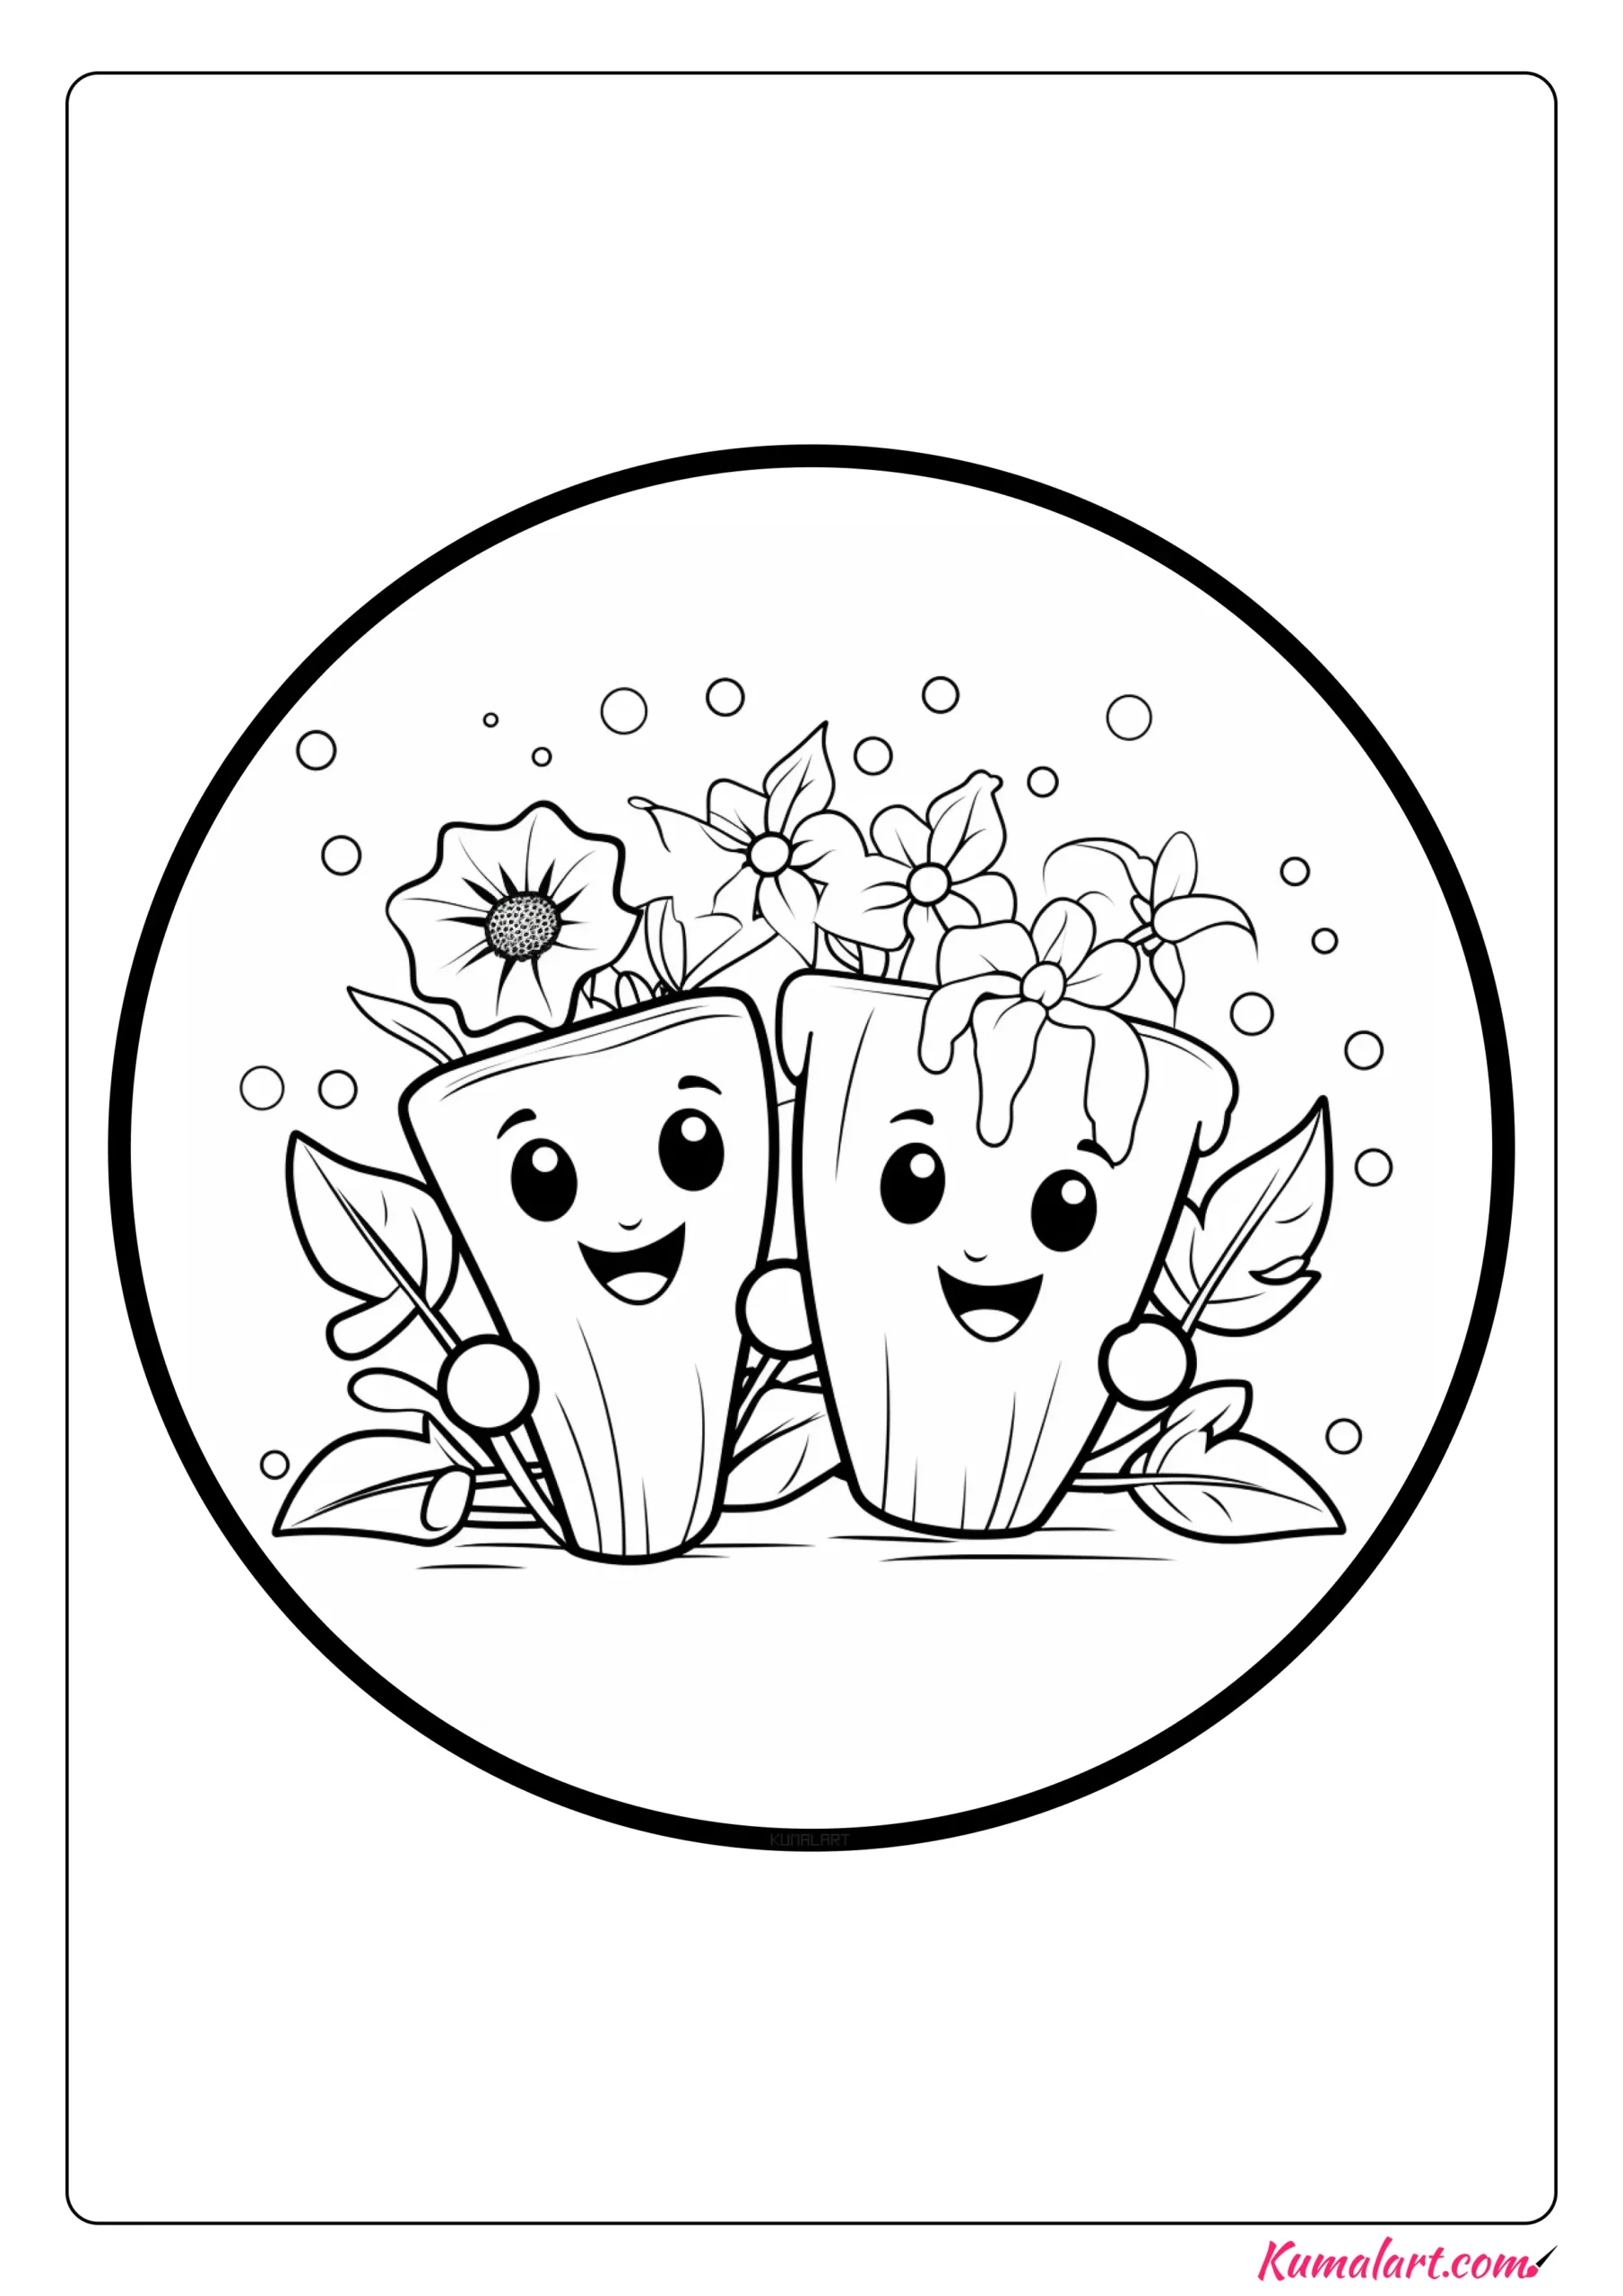 Delicious Tooth Brushing Coloring Page